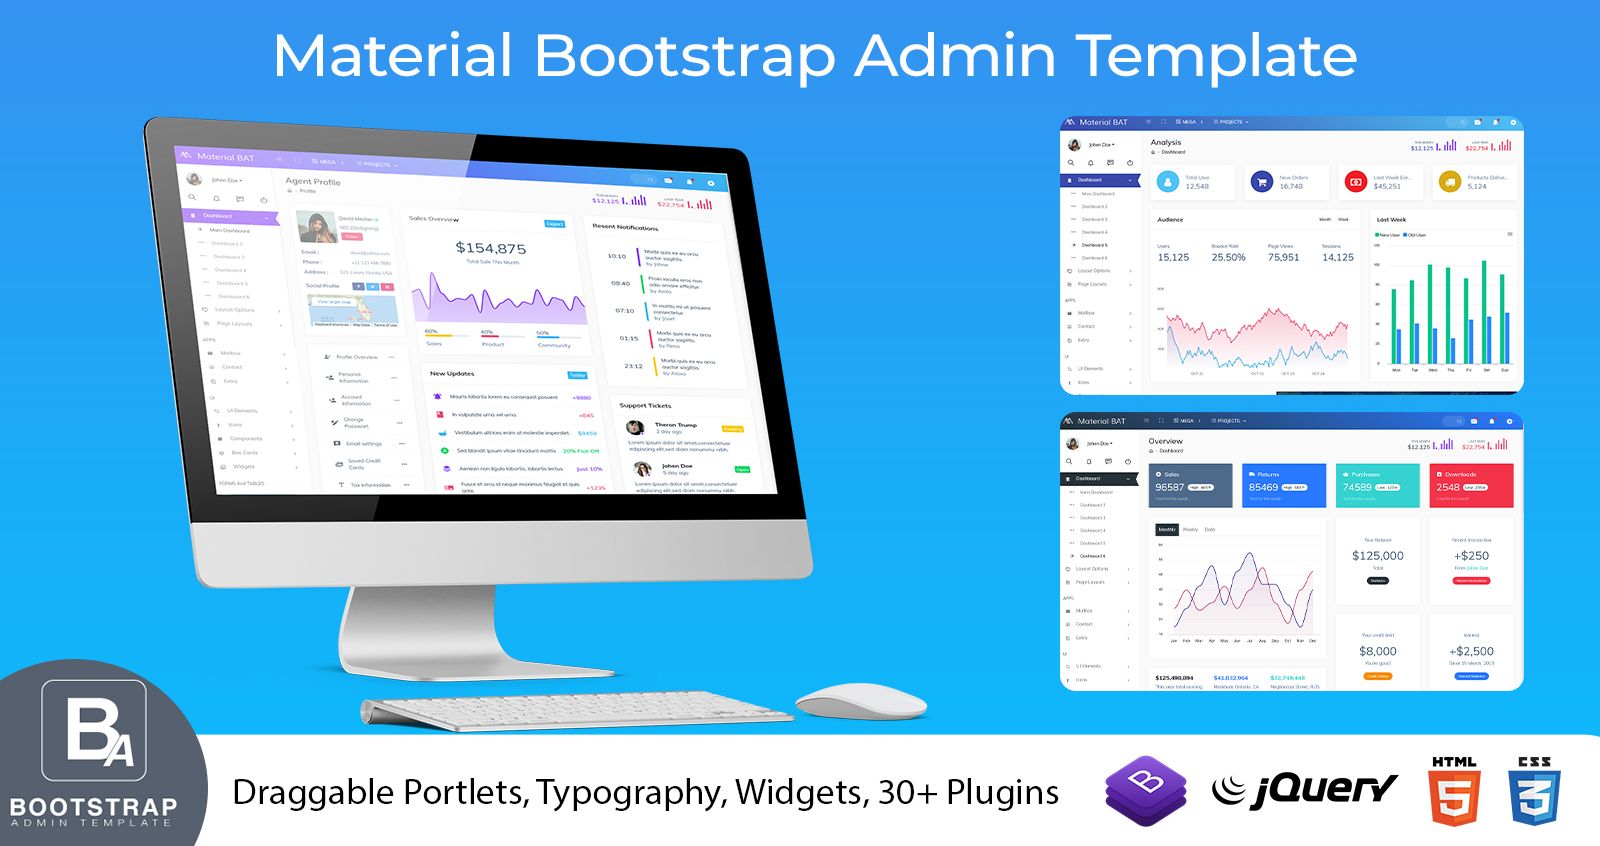 How To Find The Best One Out Of Admin Templates?